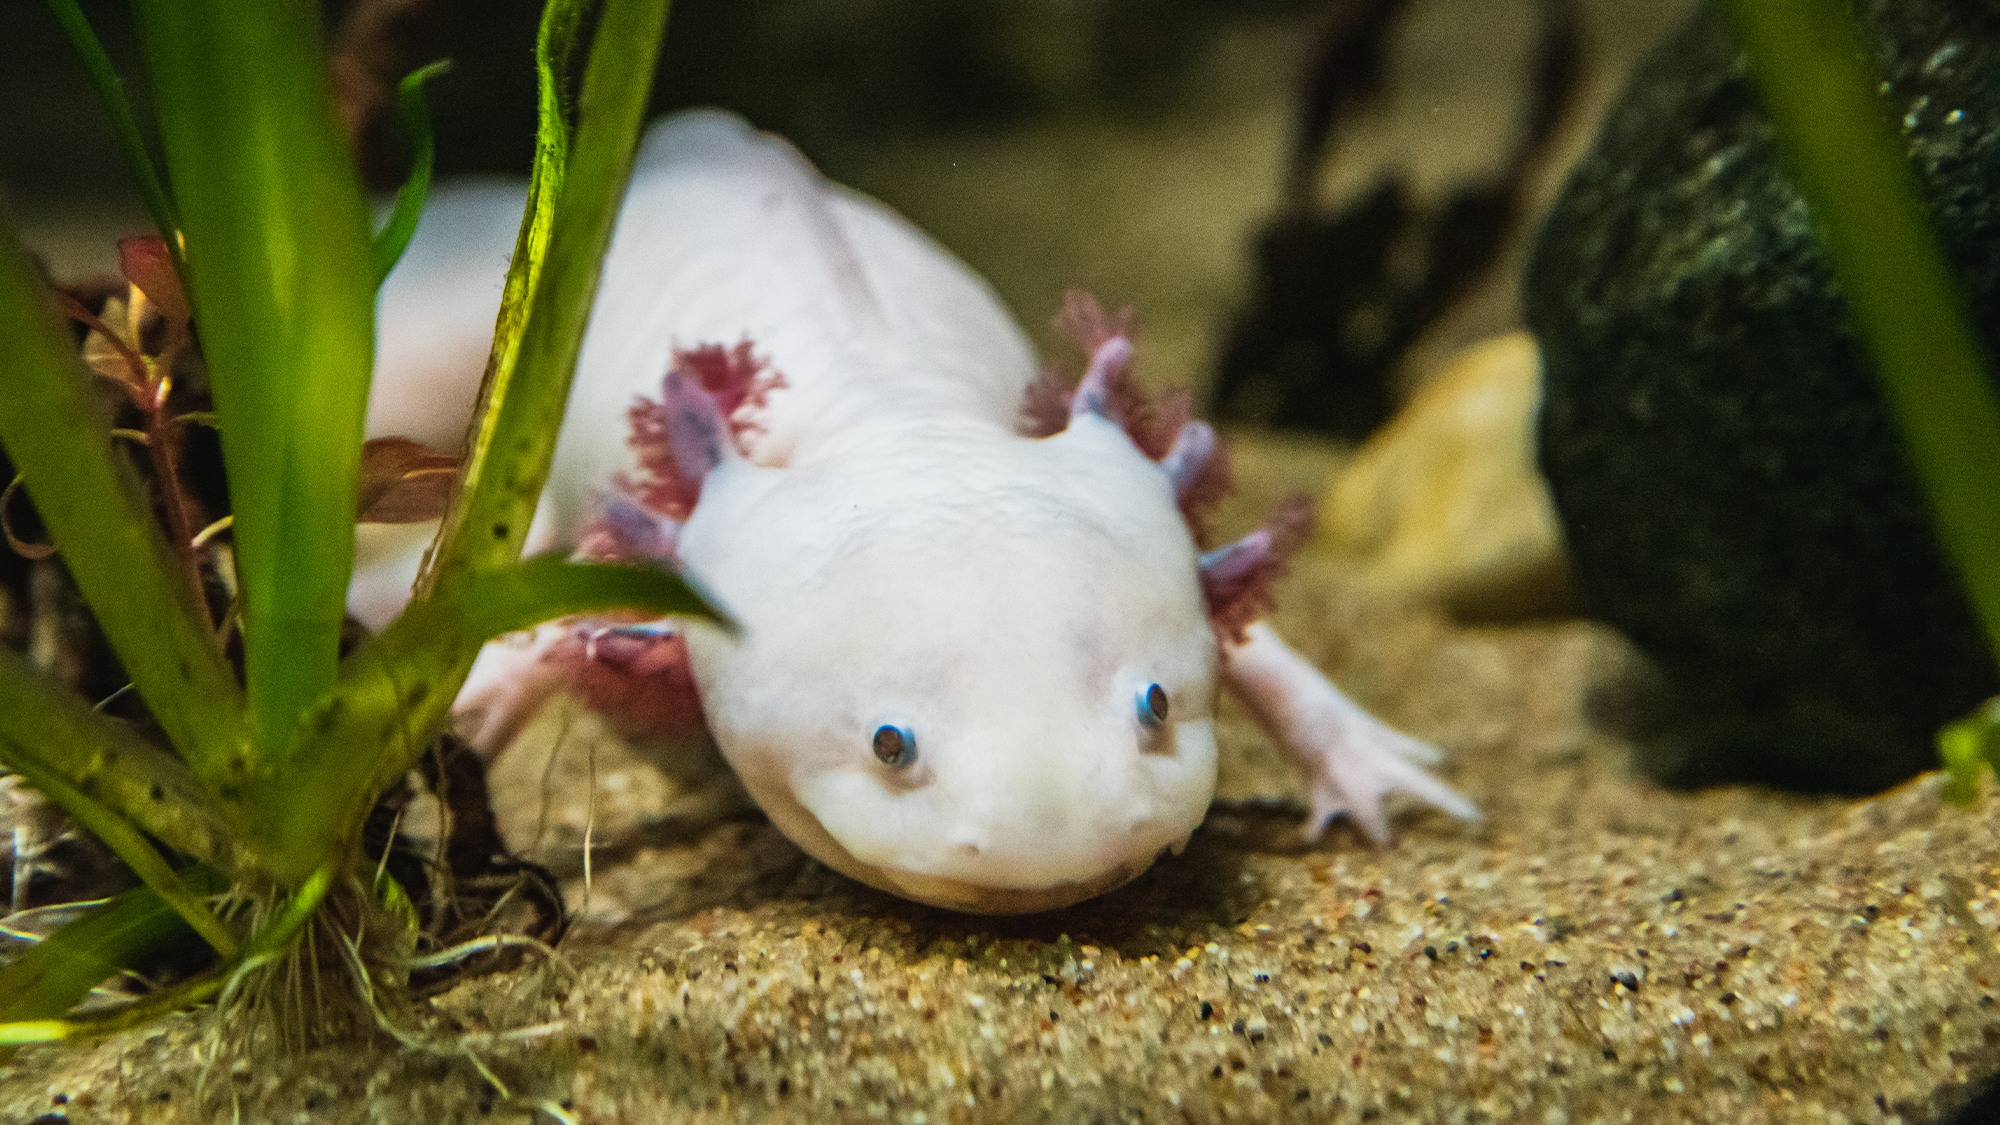 Some axolotls I made yesterday, because. they look cool!? The